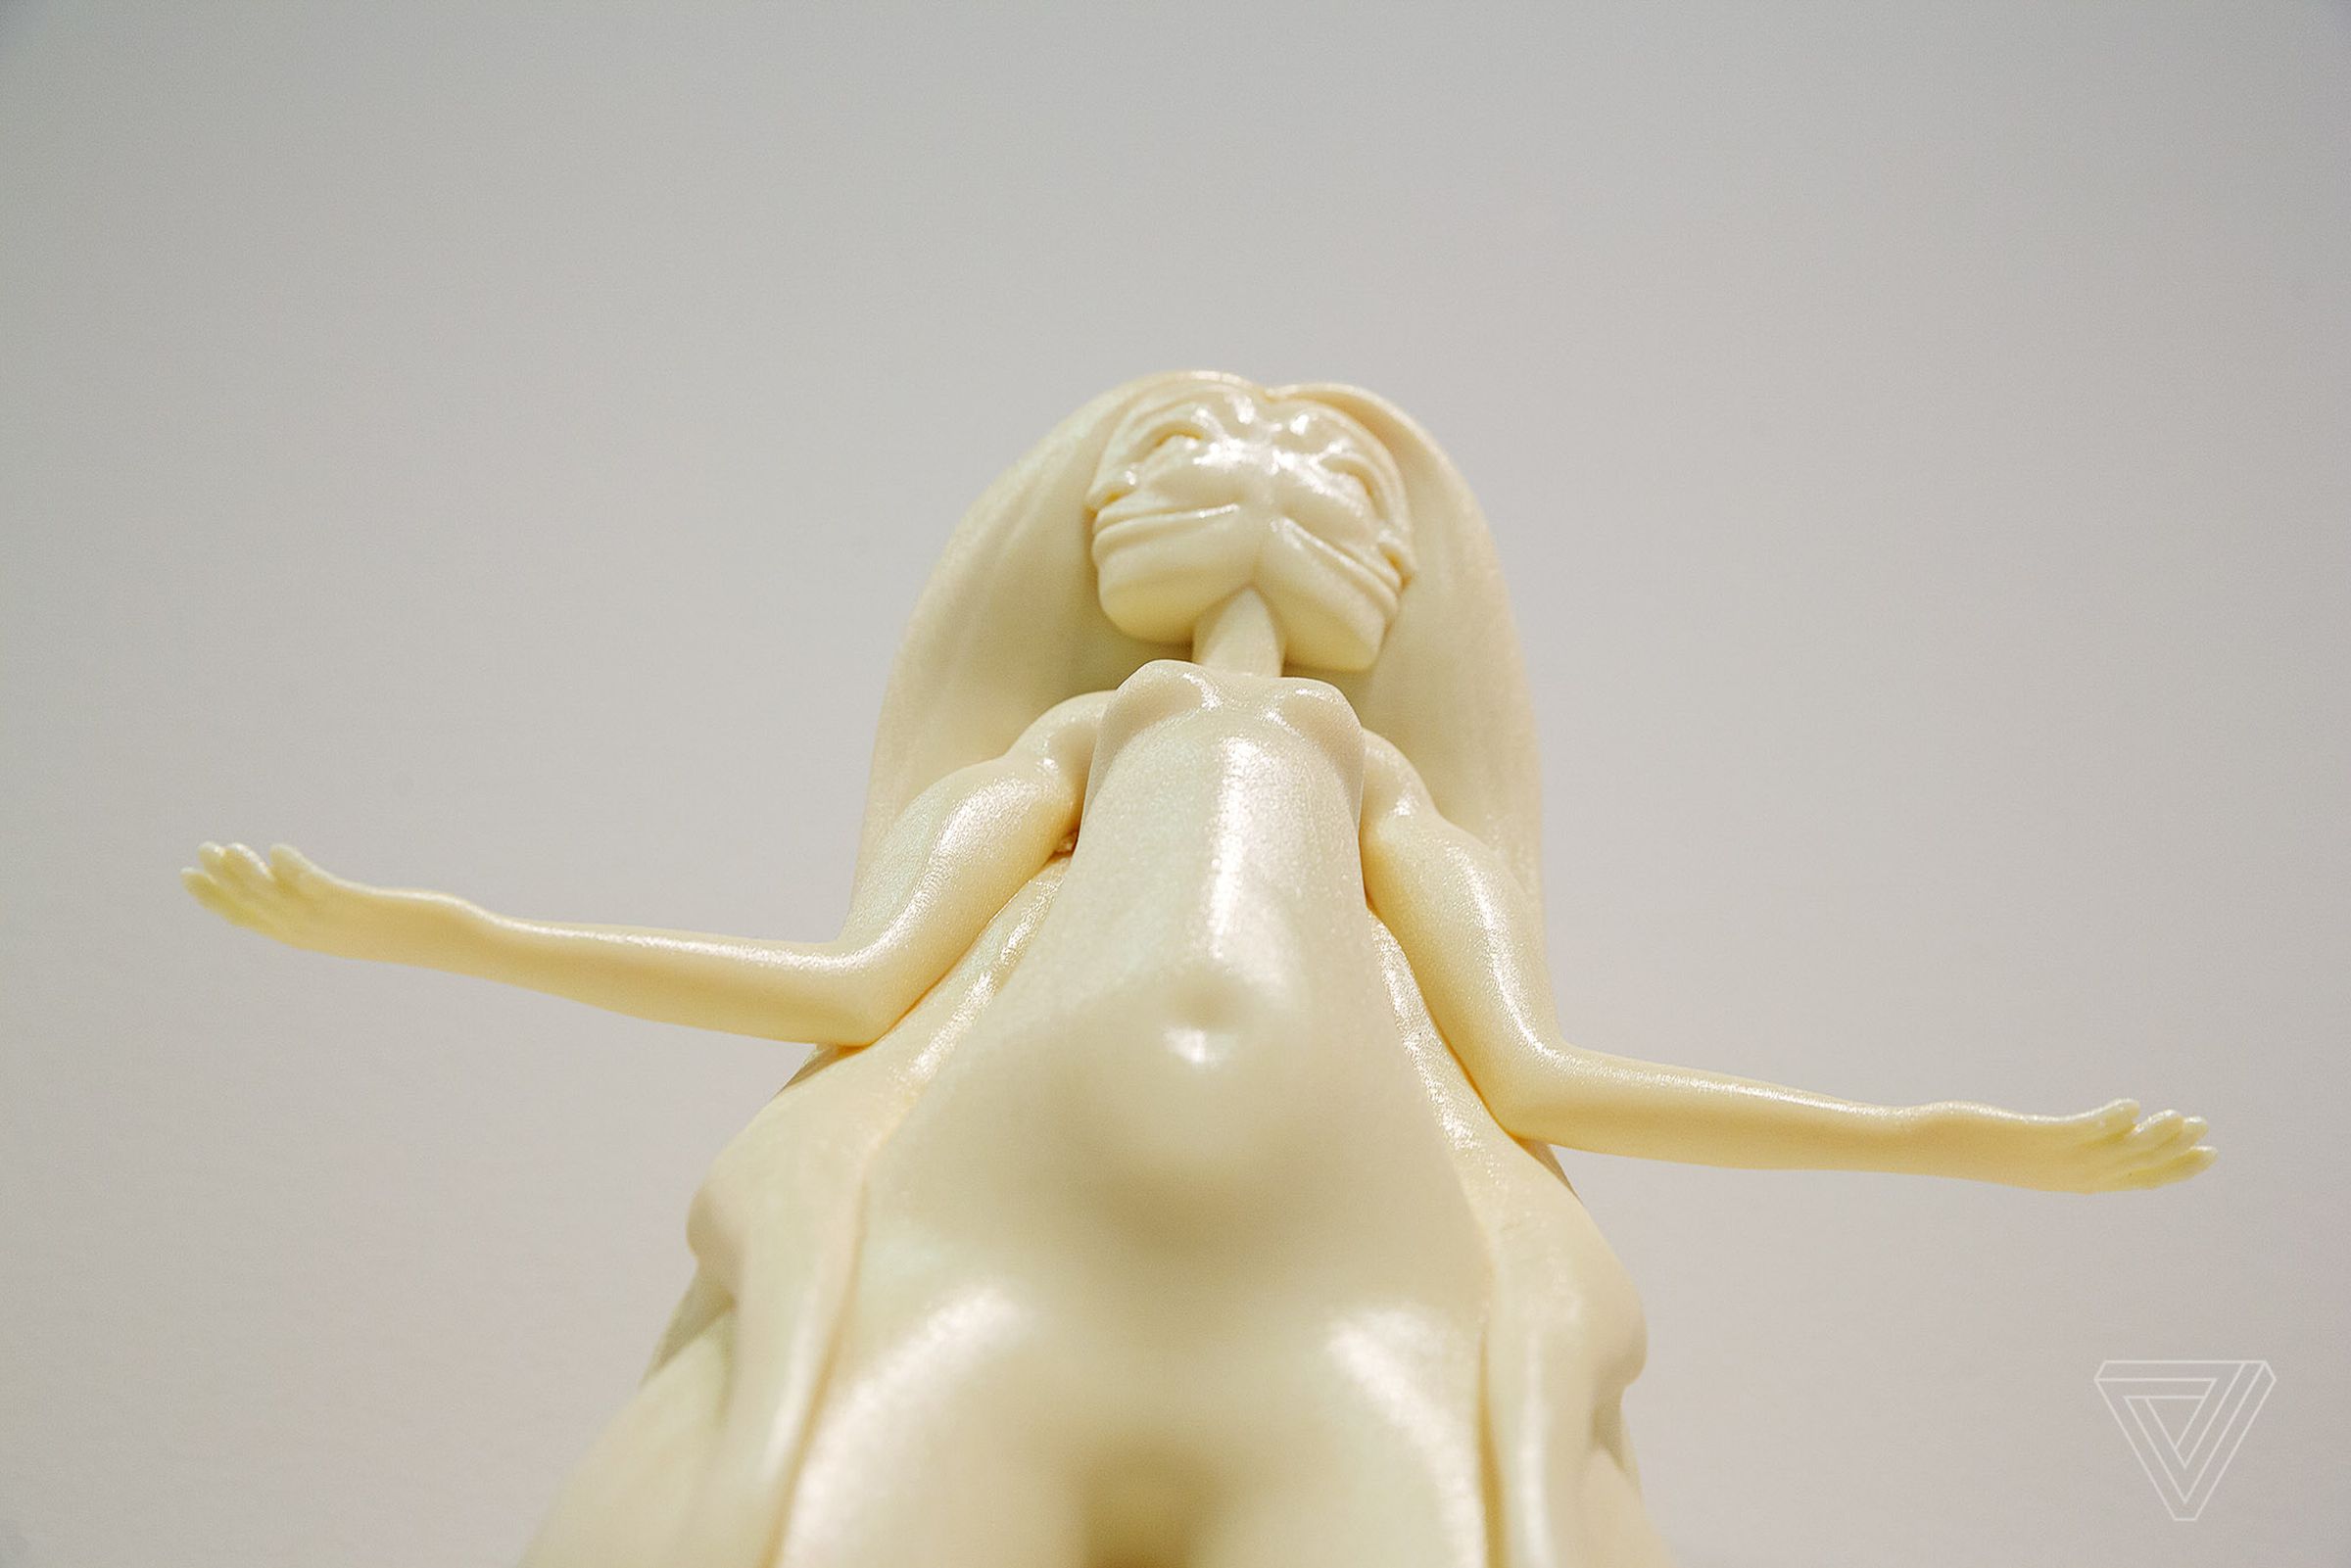 3D printed in resin, the Aisha Qandisha (2018) sculpture stands at 14.4 inches tall. 